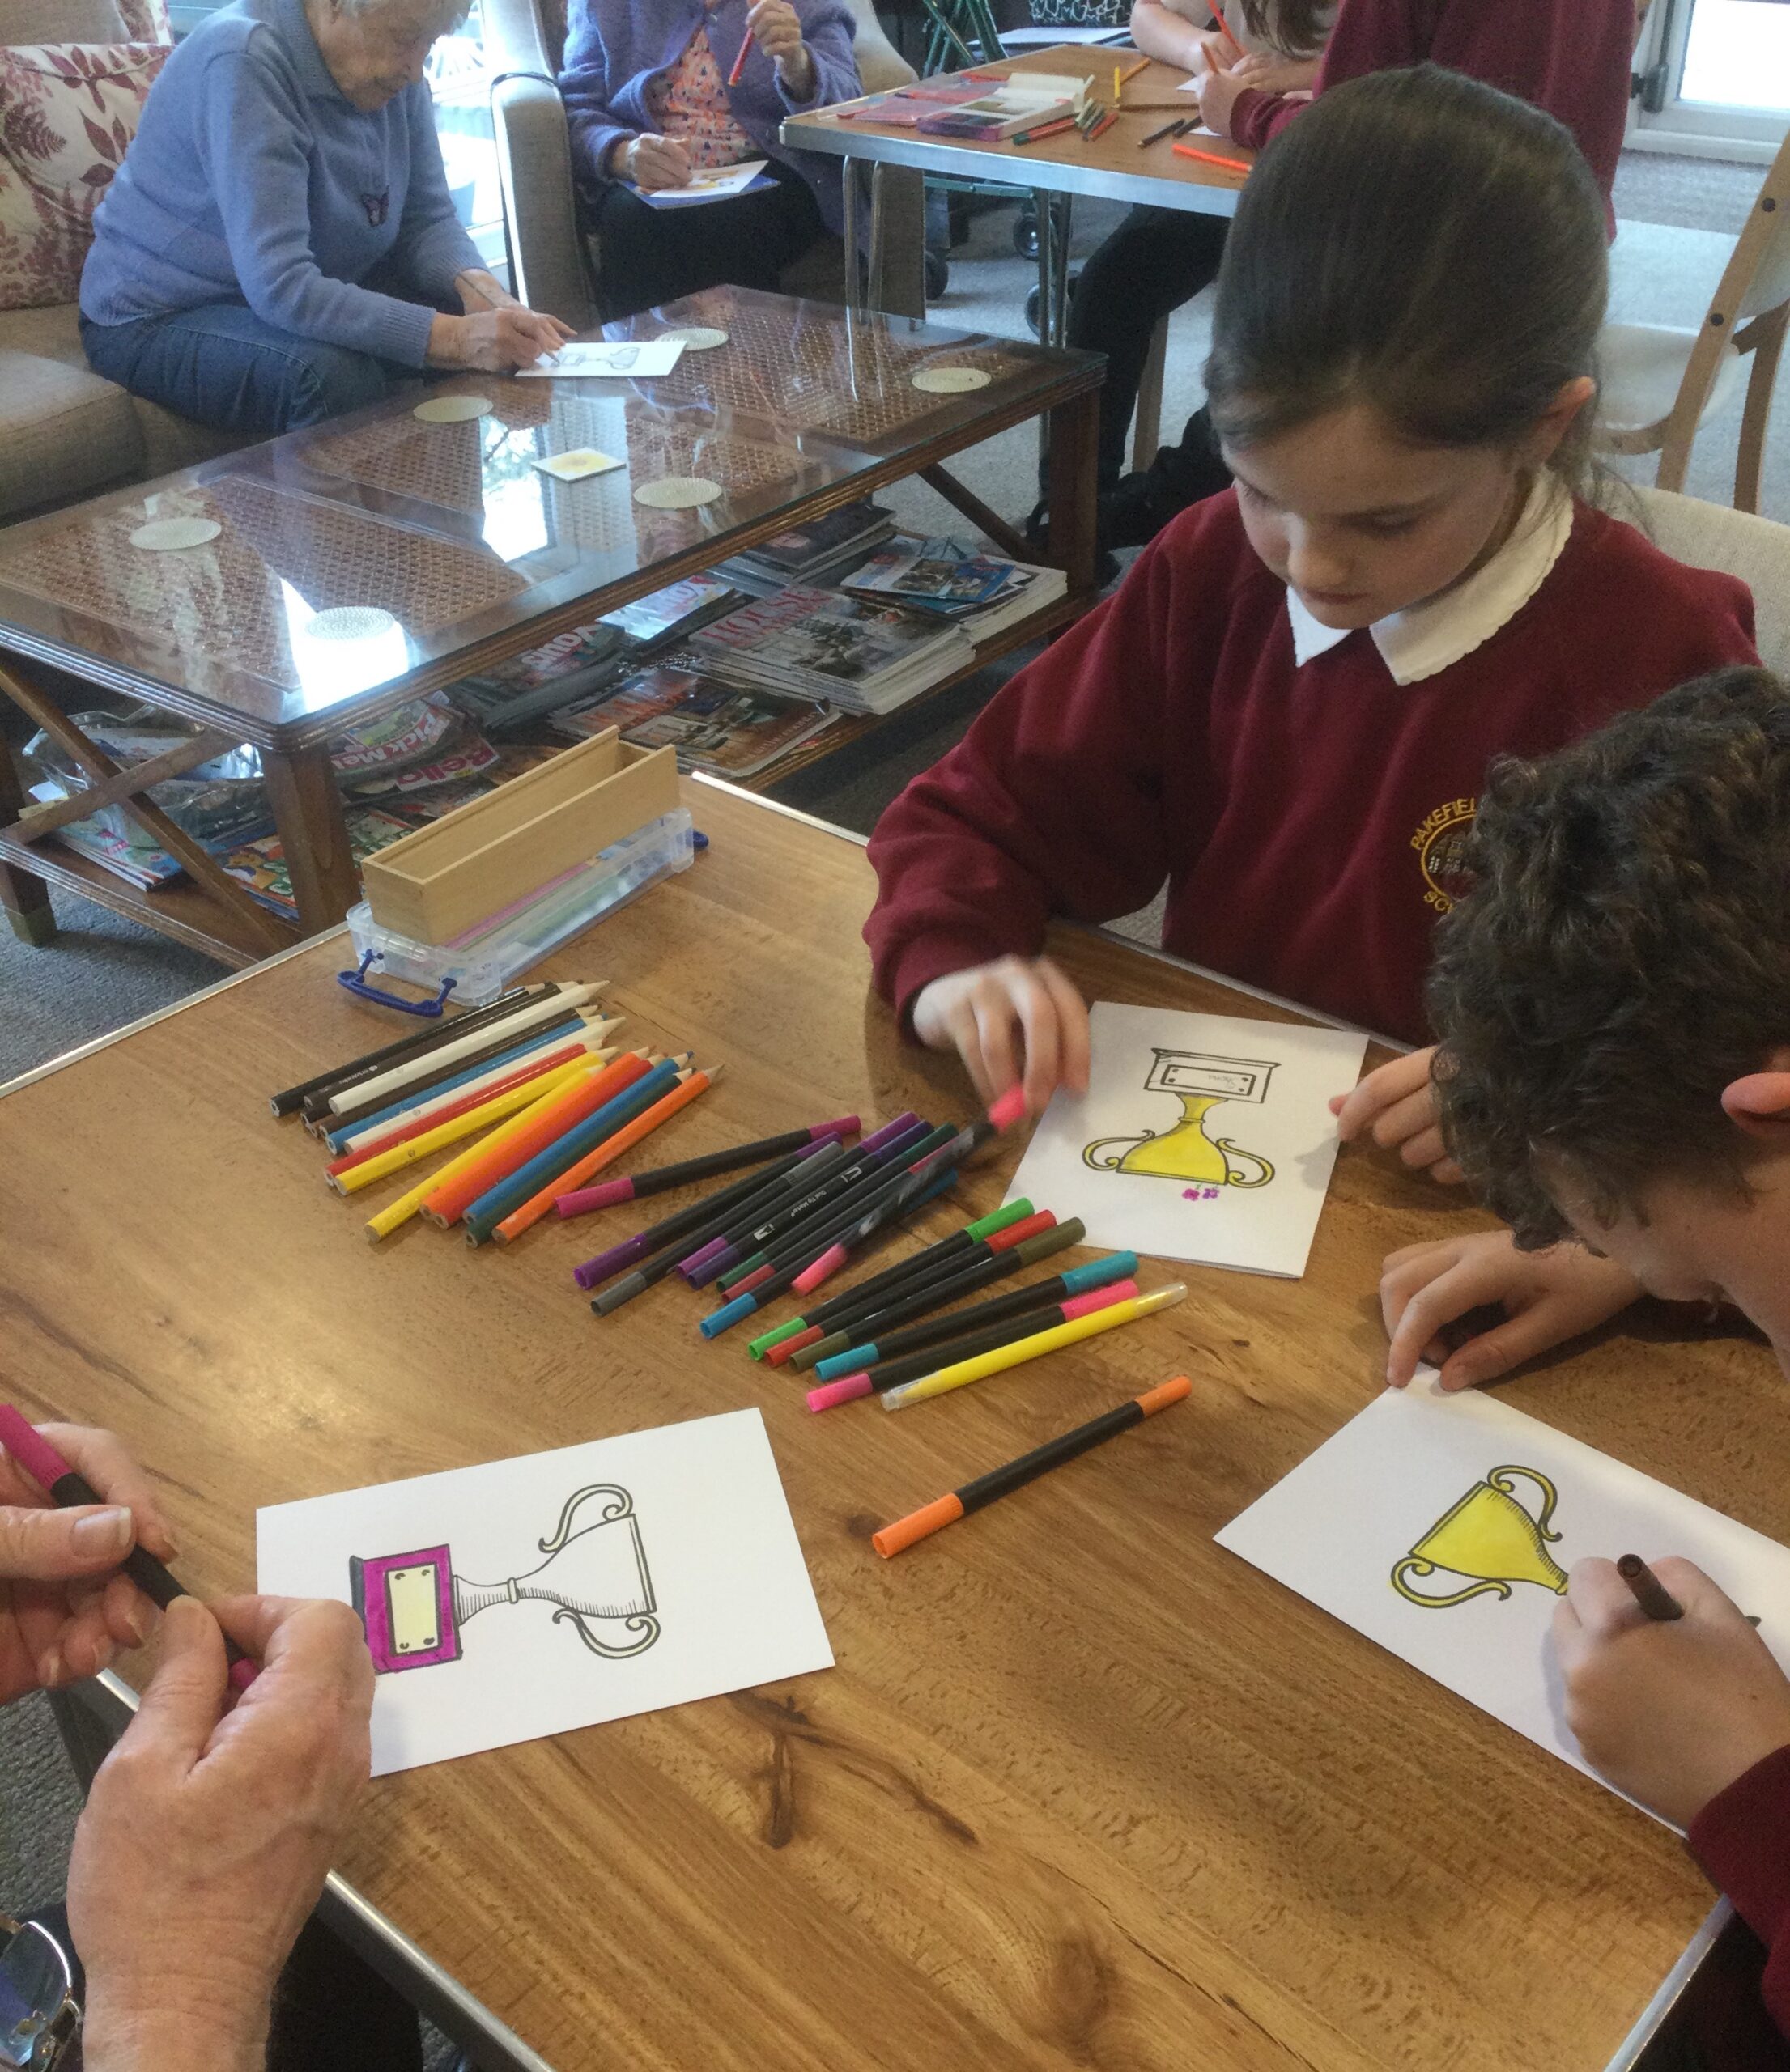 Children colouring in white cards with a printed trophy on the front